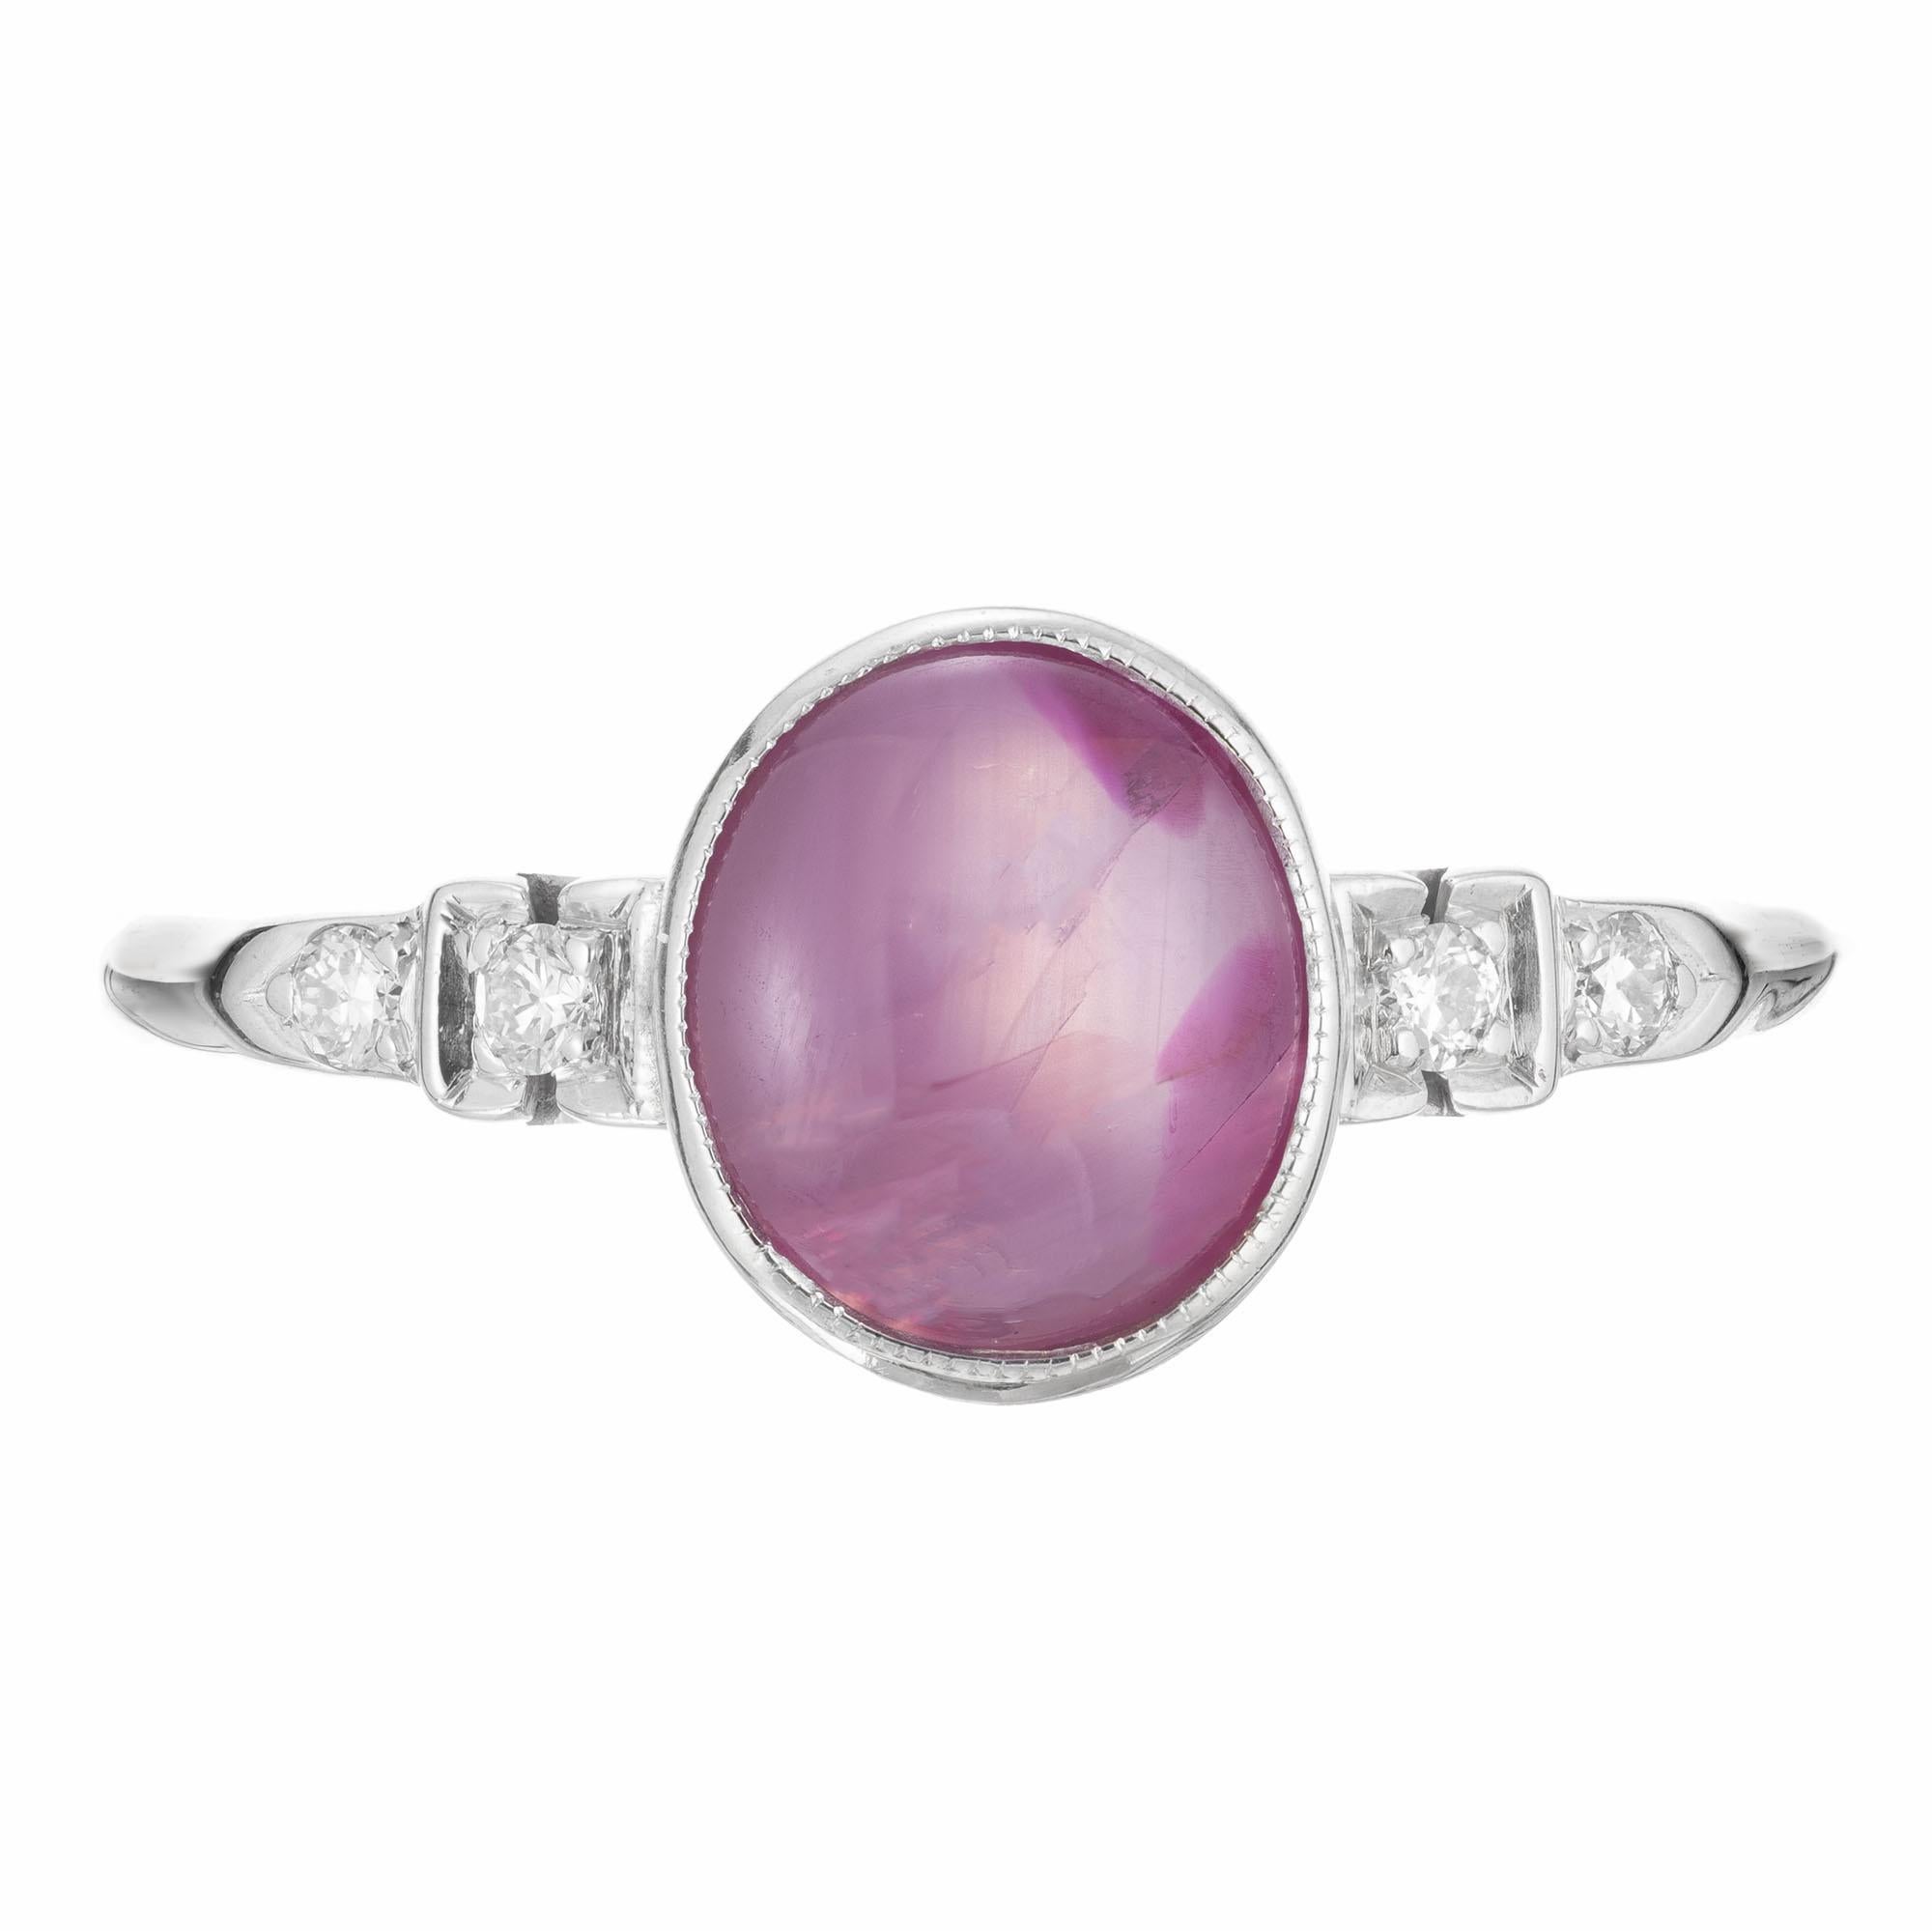 1940's Natural purple star Sapphire and diamond engagement ring. GIA certified oval cabochon bezel set star sapphire with 4 round accent diamonds in a 14k white gold setting. GIA certified natural, no enhancements.

1 purple splotches natural oval